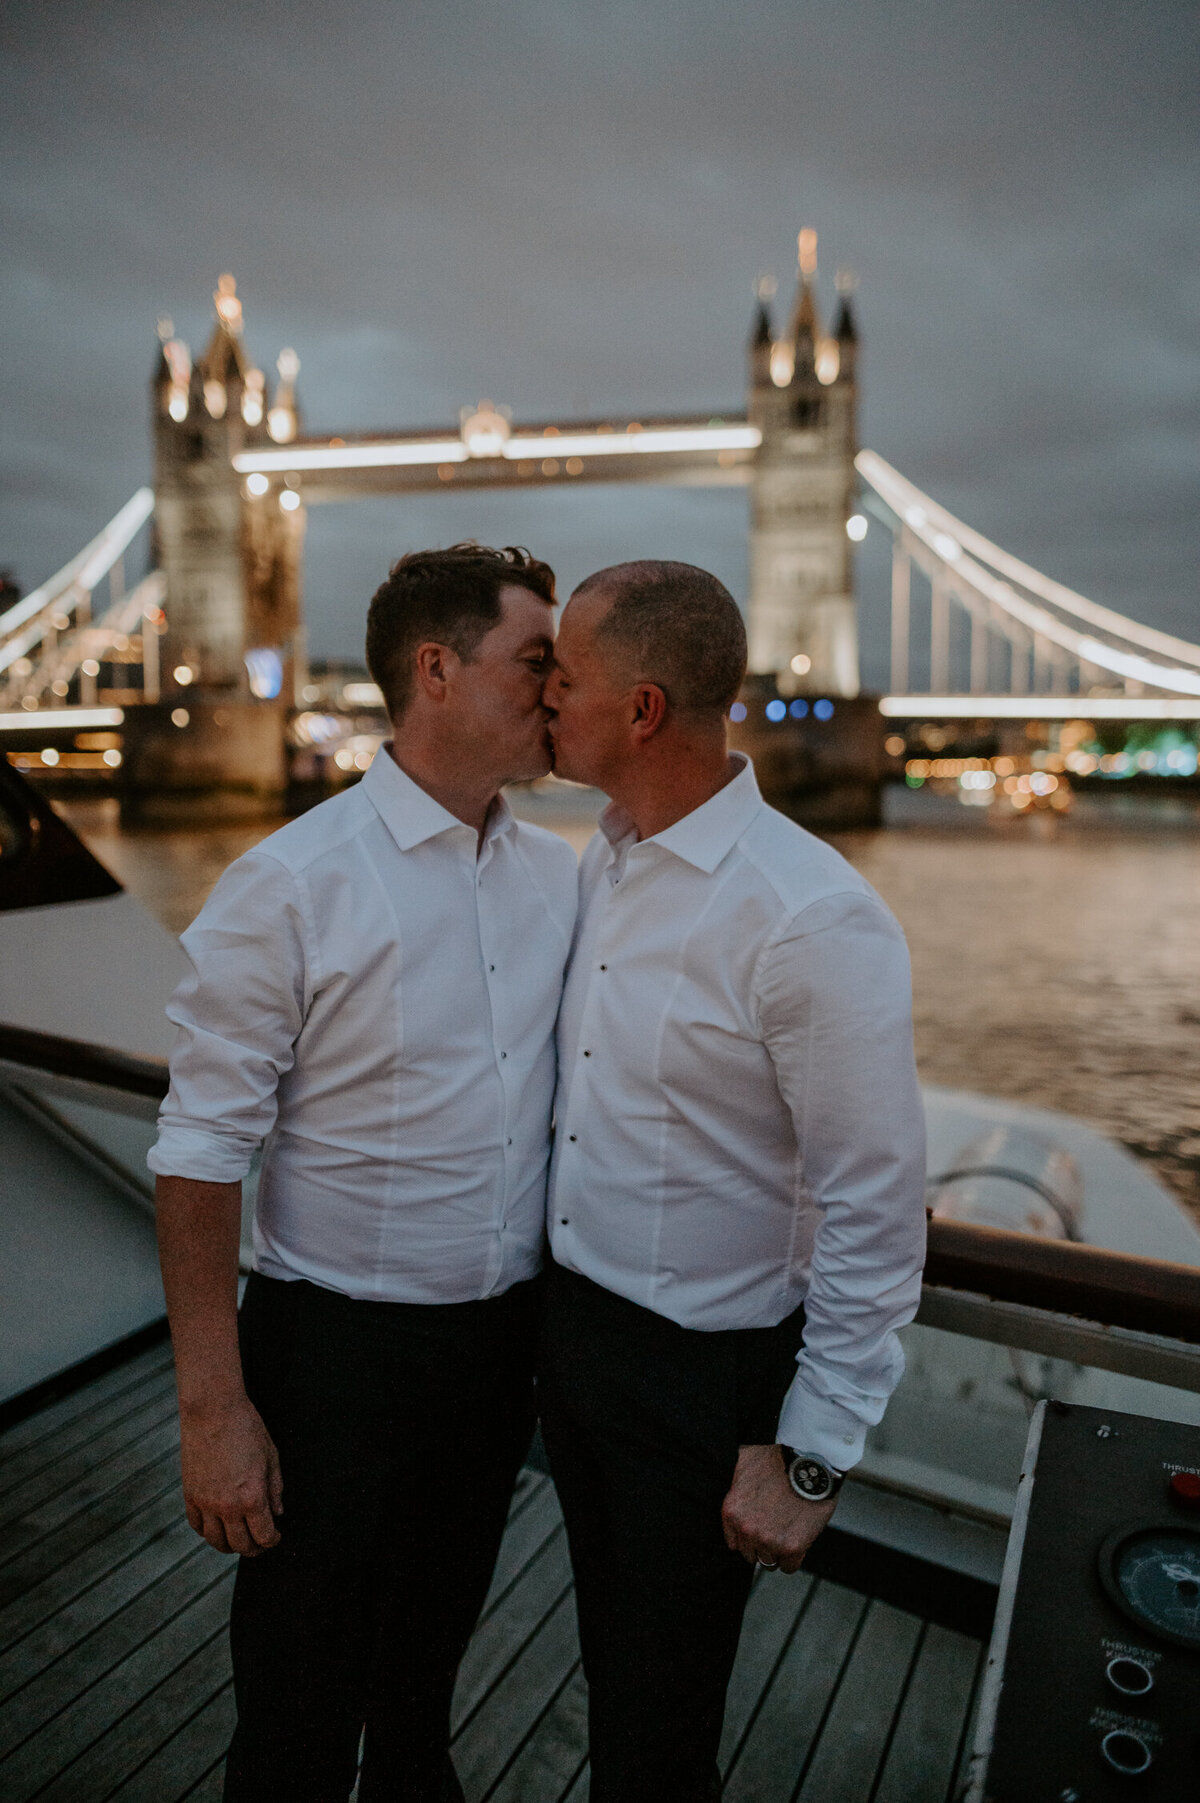 Married at Marylebone Town Hall and then onto The Silver Sturgeon for their reception, these two grooms kiss under a night sky in London as they go under Tower Bridge on the Thames.